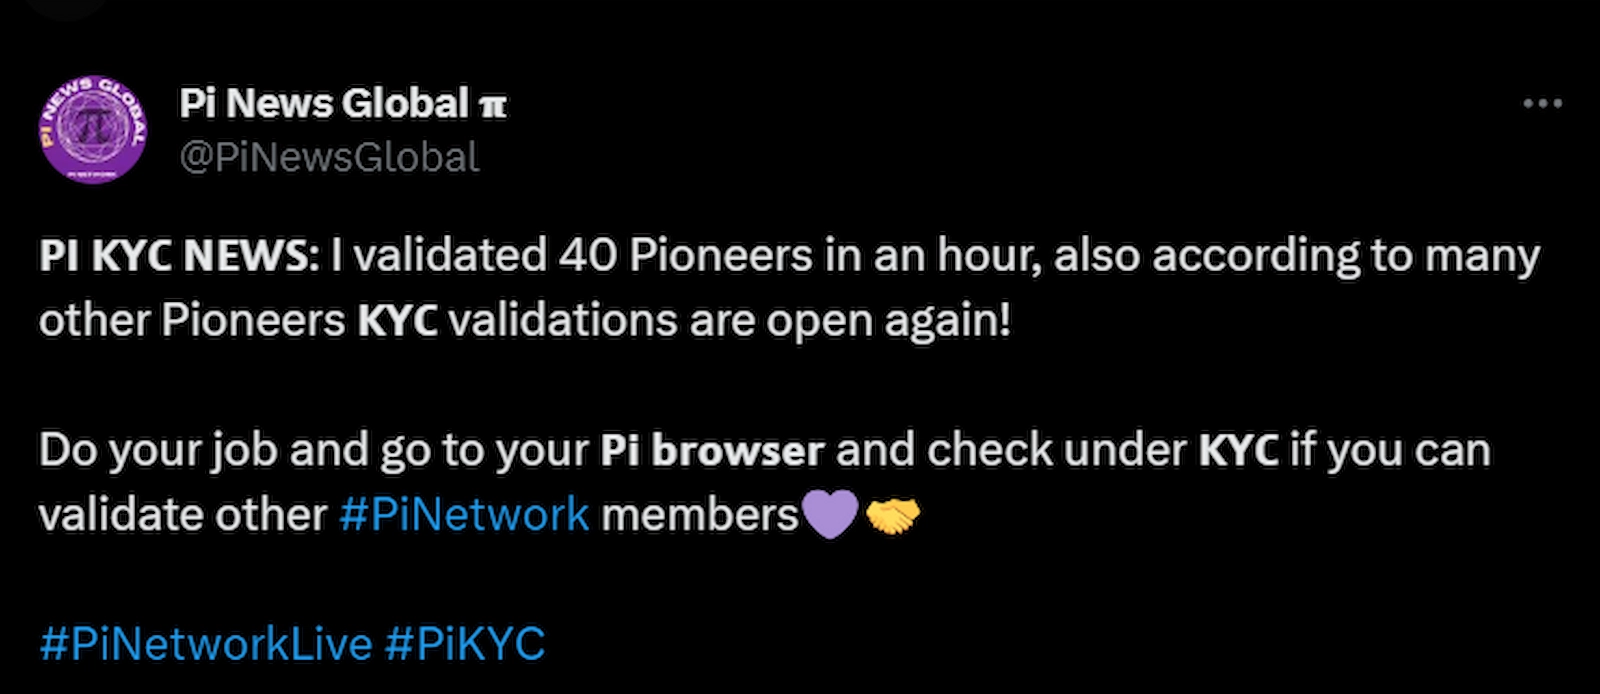 Pi Network validators claimed KYC validations are going at a steady pace.